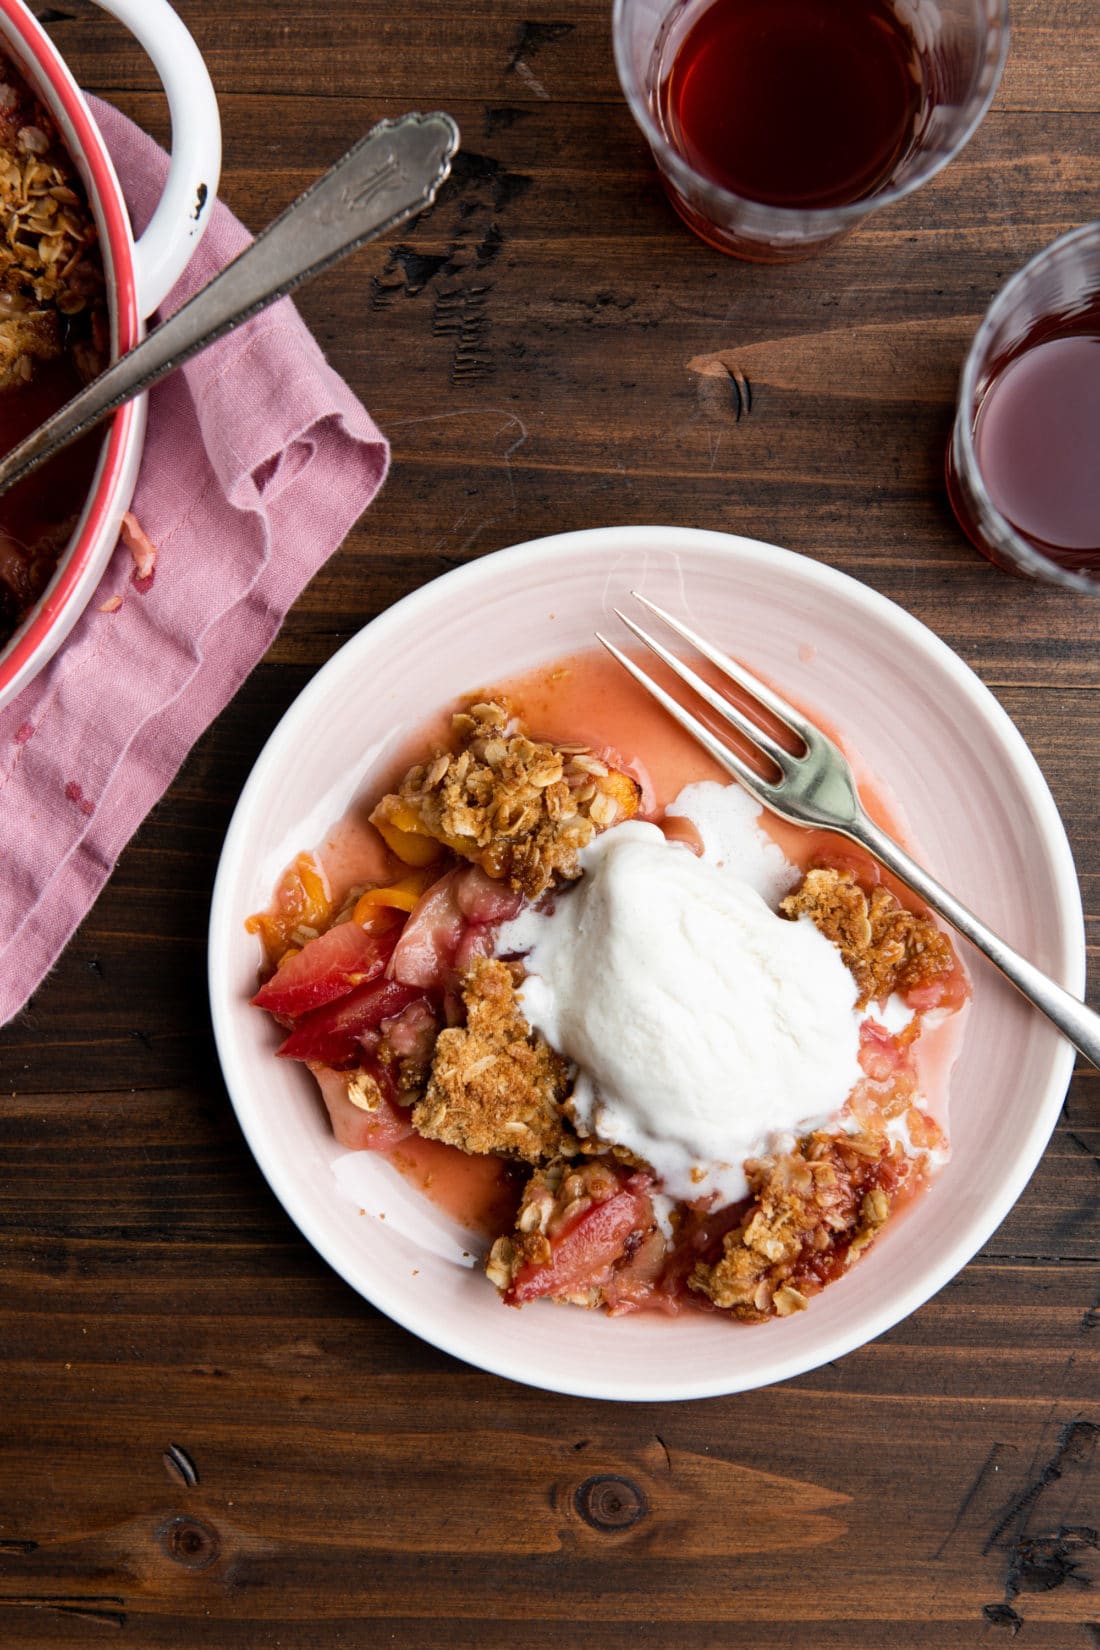 Plate of Plum and Nectarine Crisp topped with ice cream.